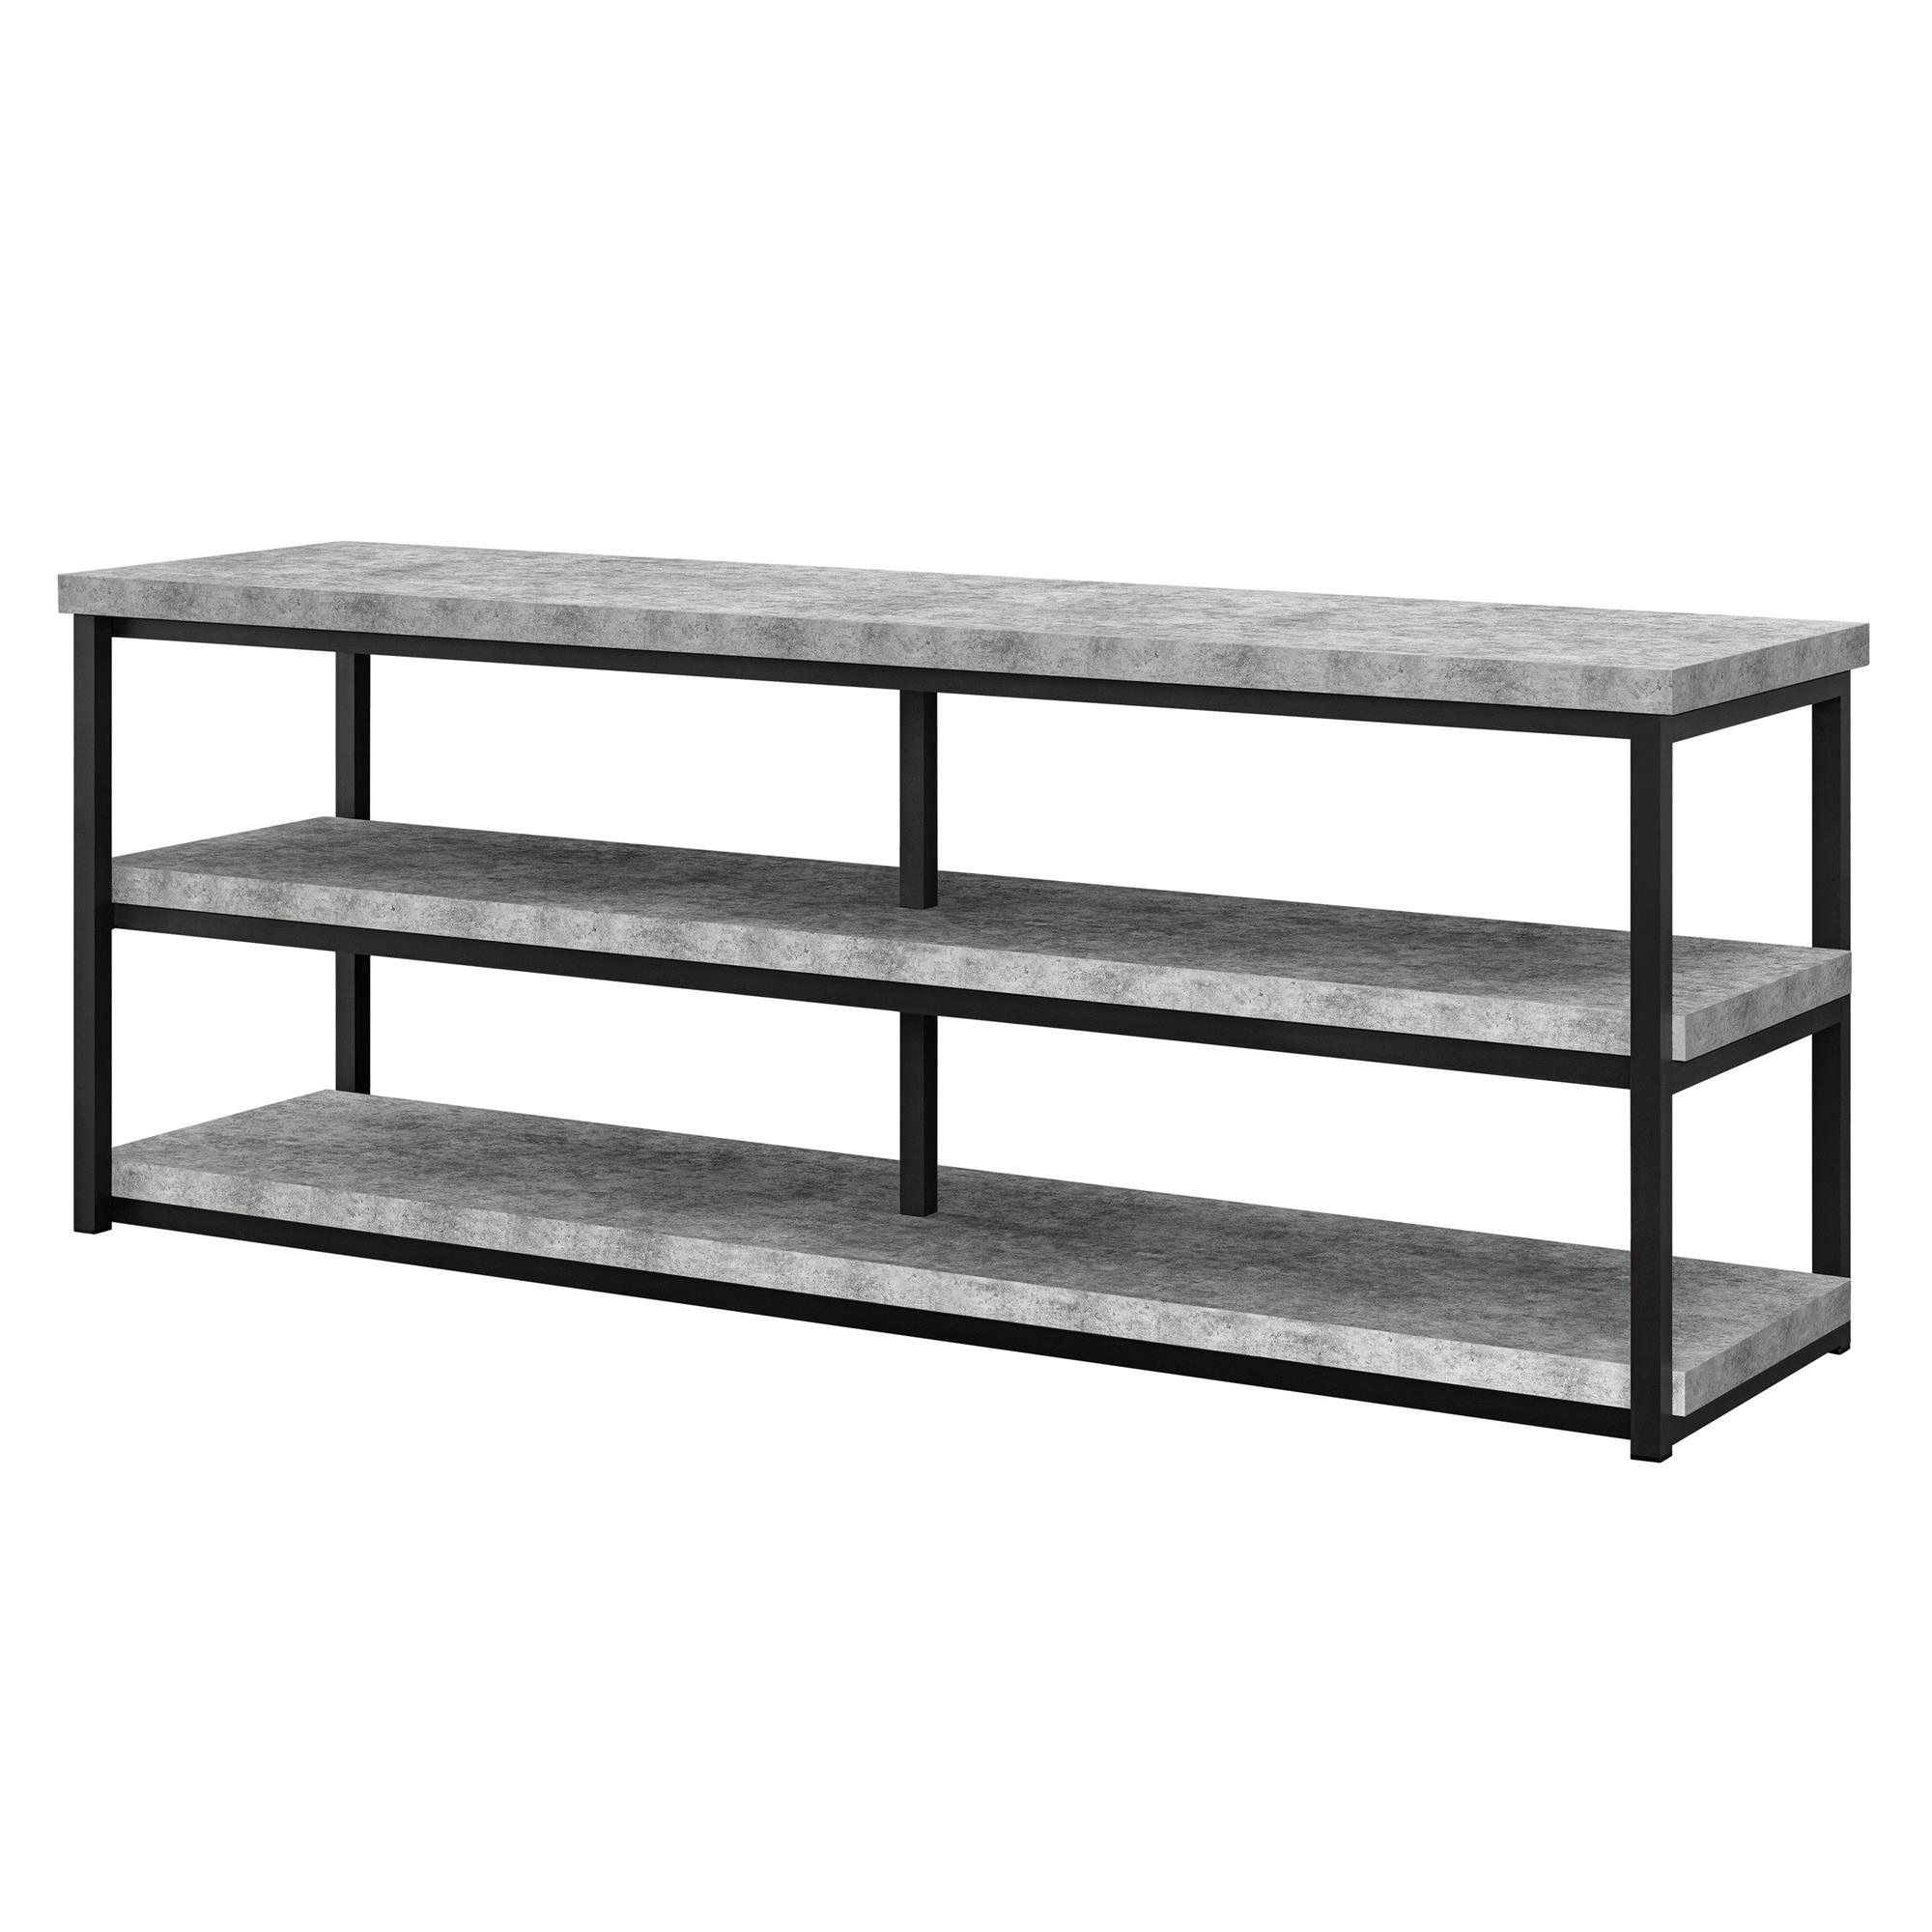 New in box Ameriwood Home Ashlar TV Stand for TVs up to 65", Concrete Gray